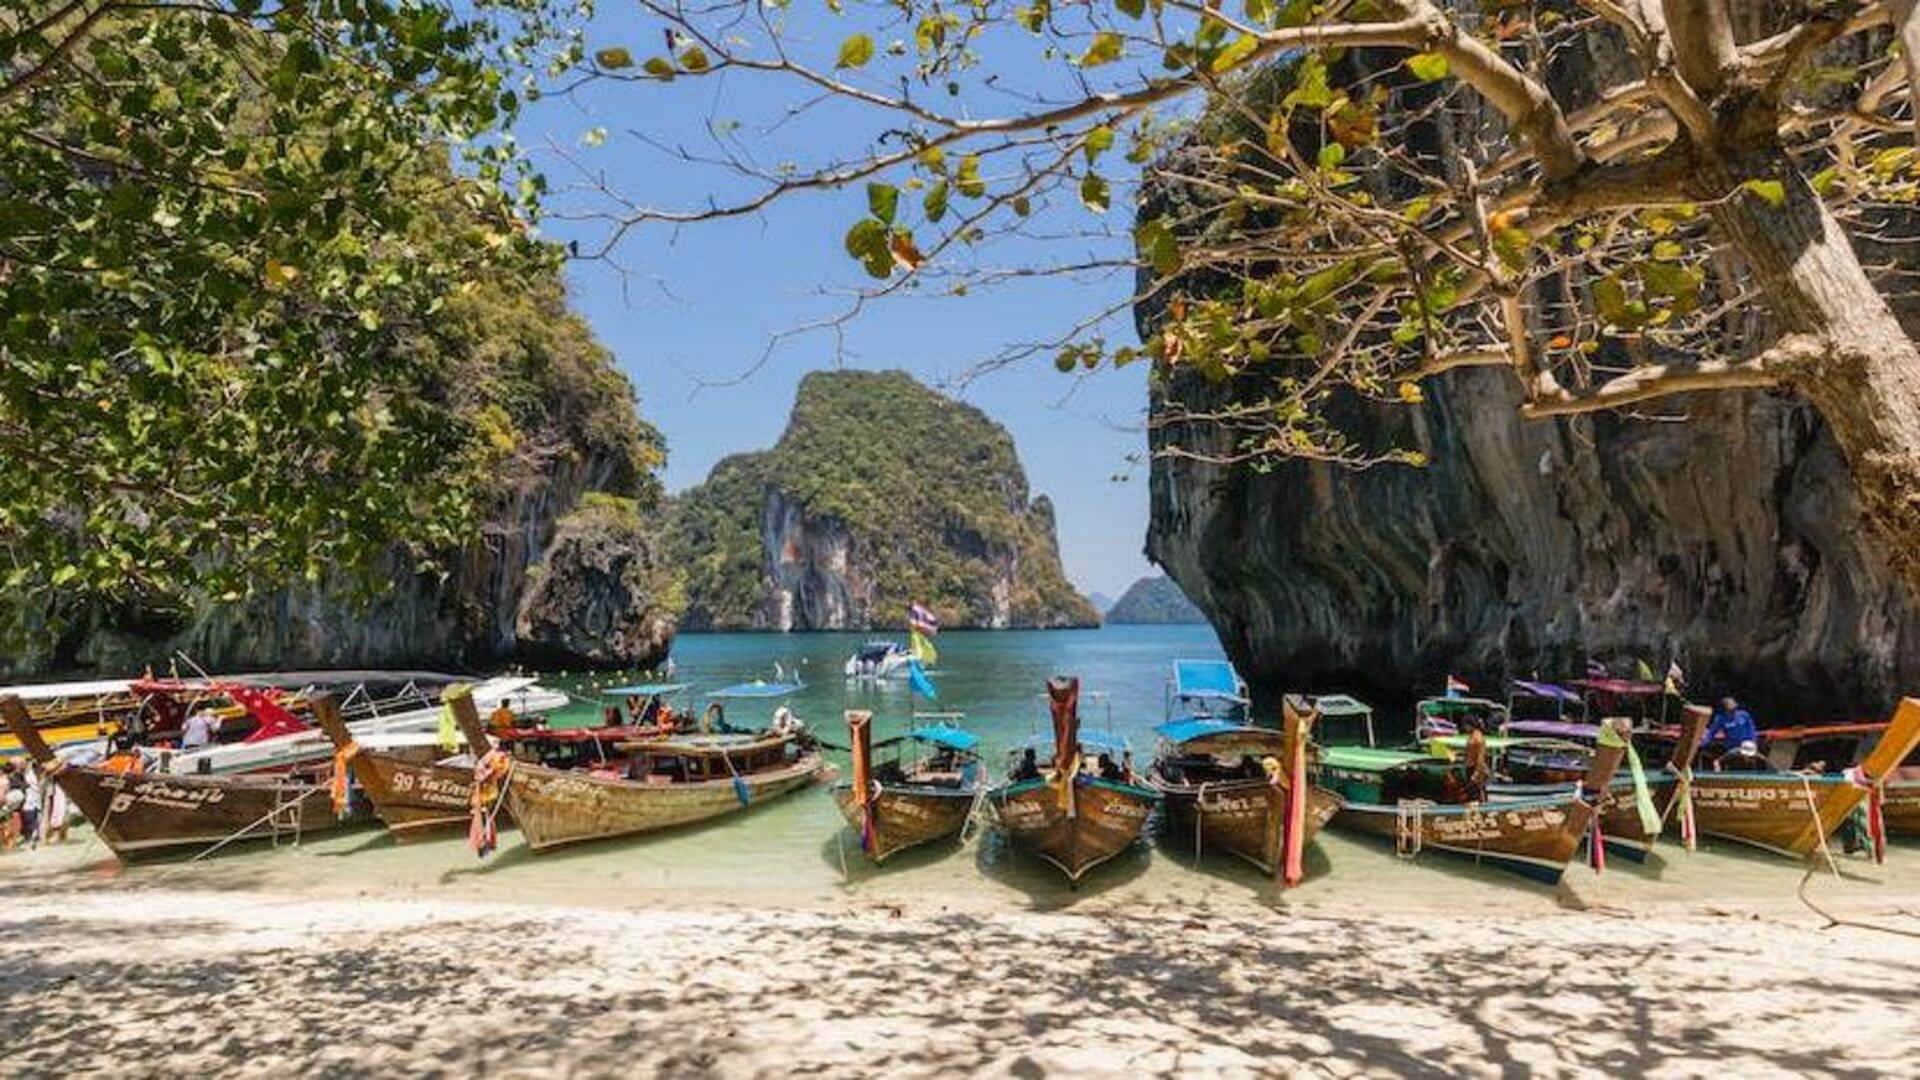 Traveling to Thailand? Beware of these scams